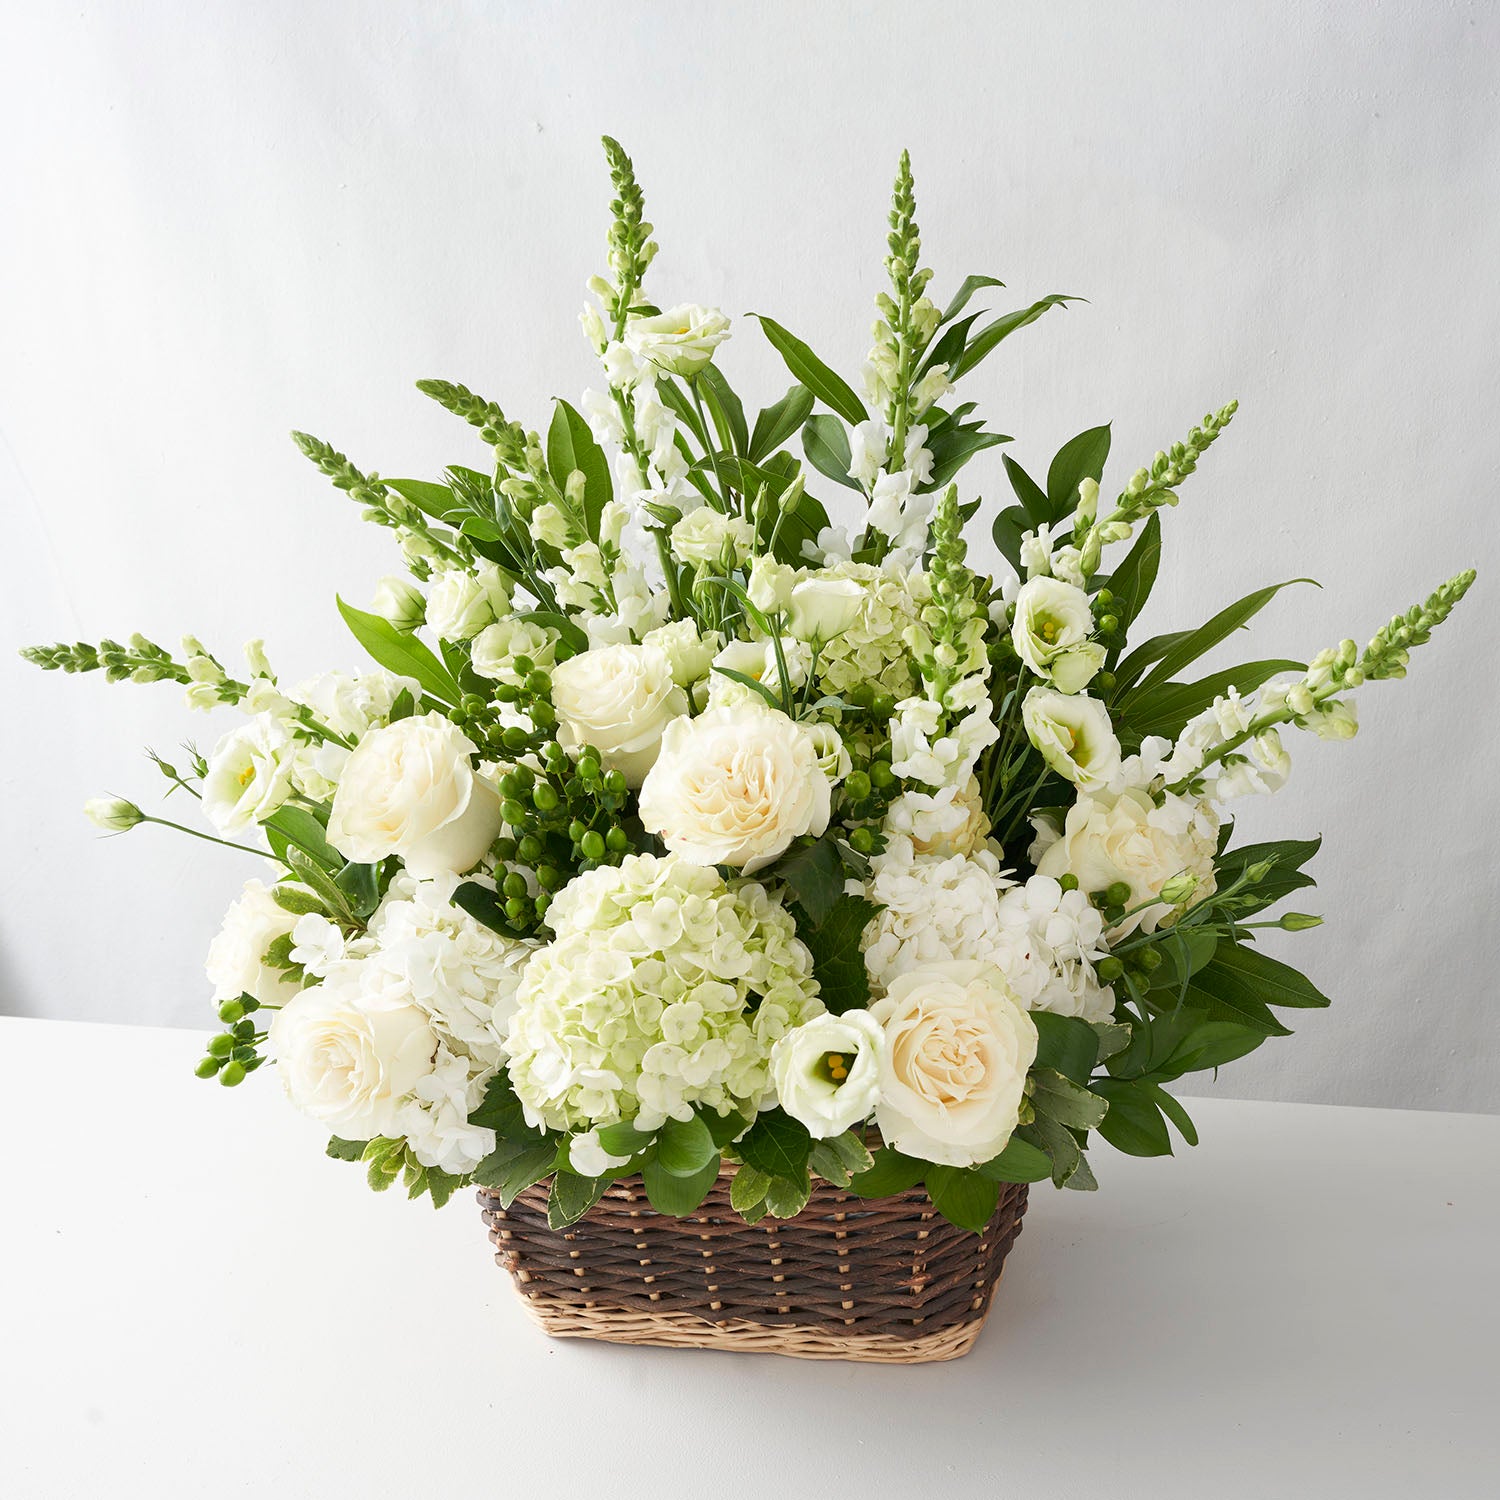 Large arrangement of all white flowers in a natural basket on a white background.